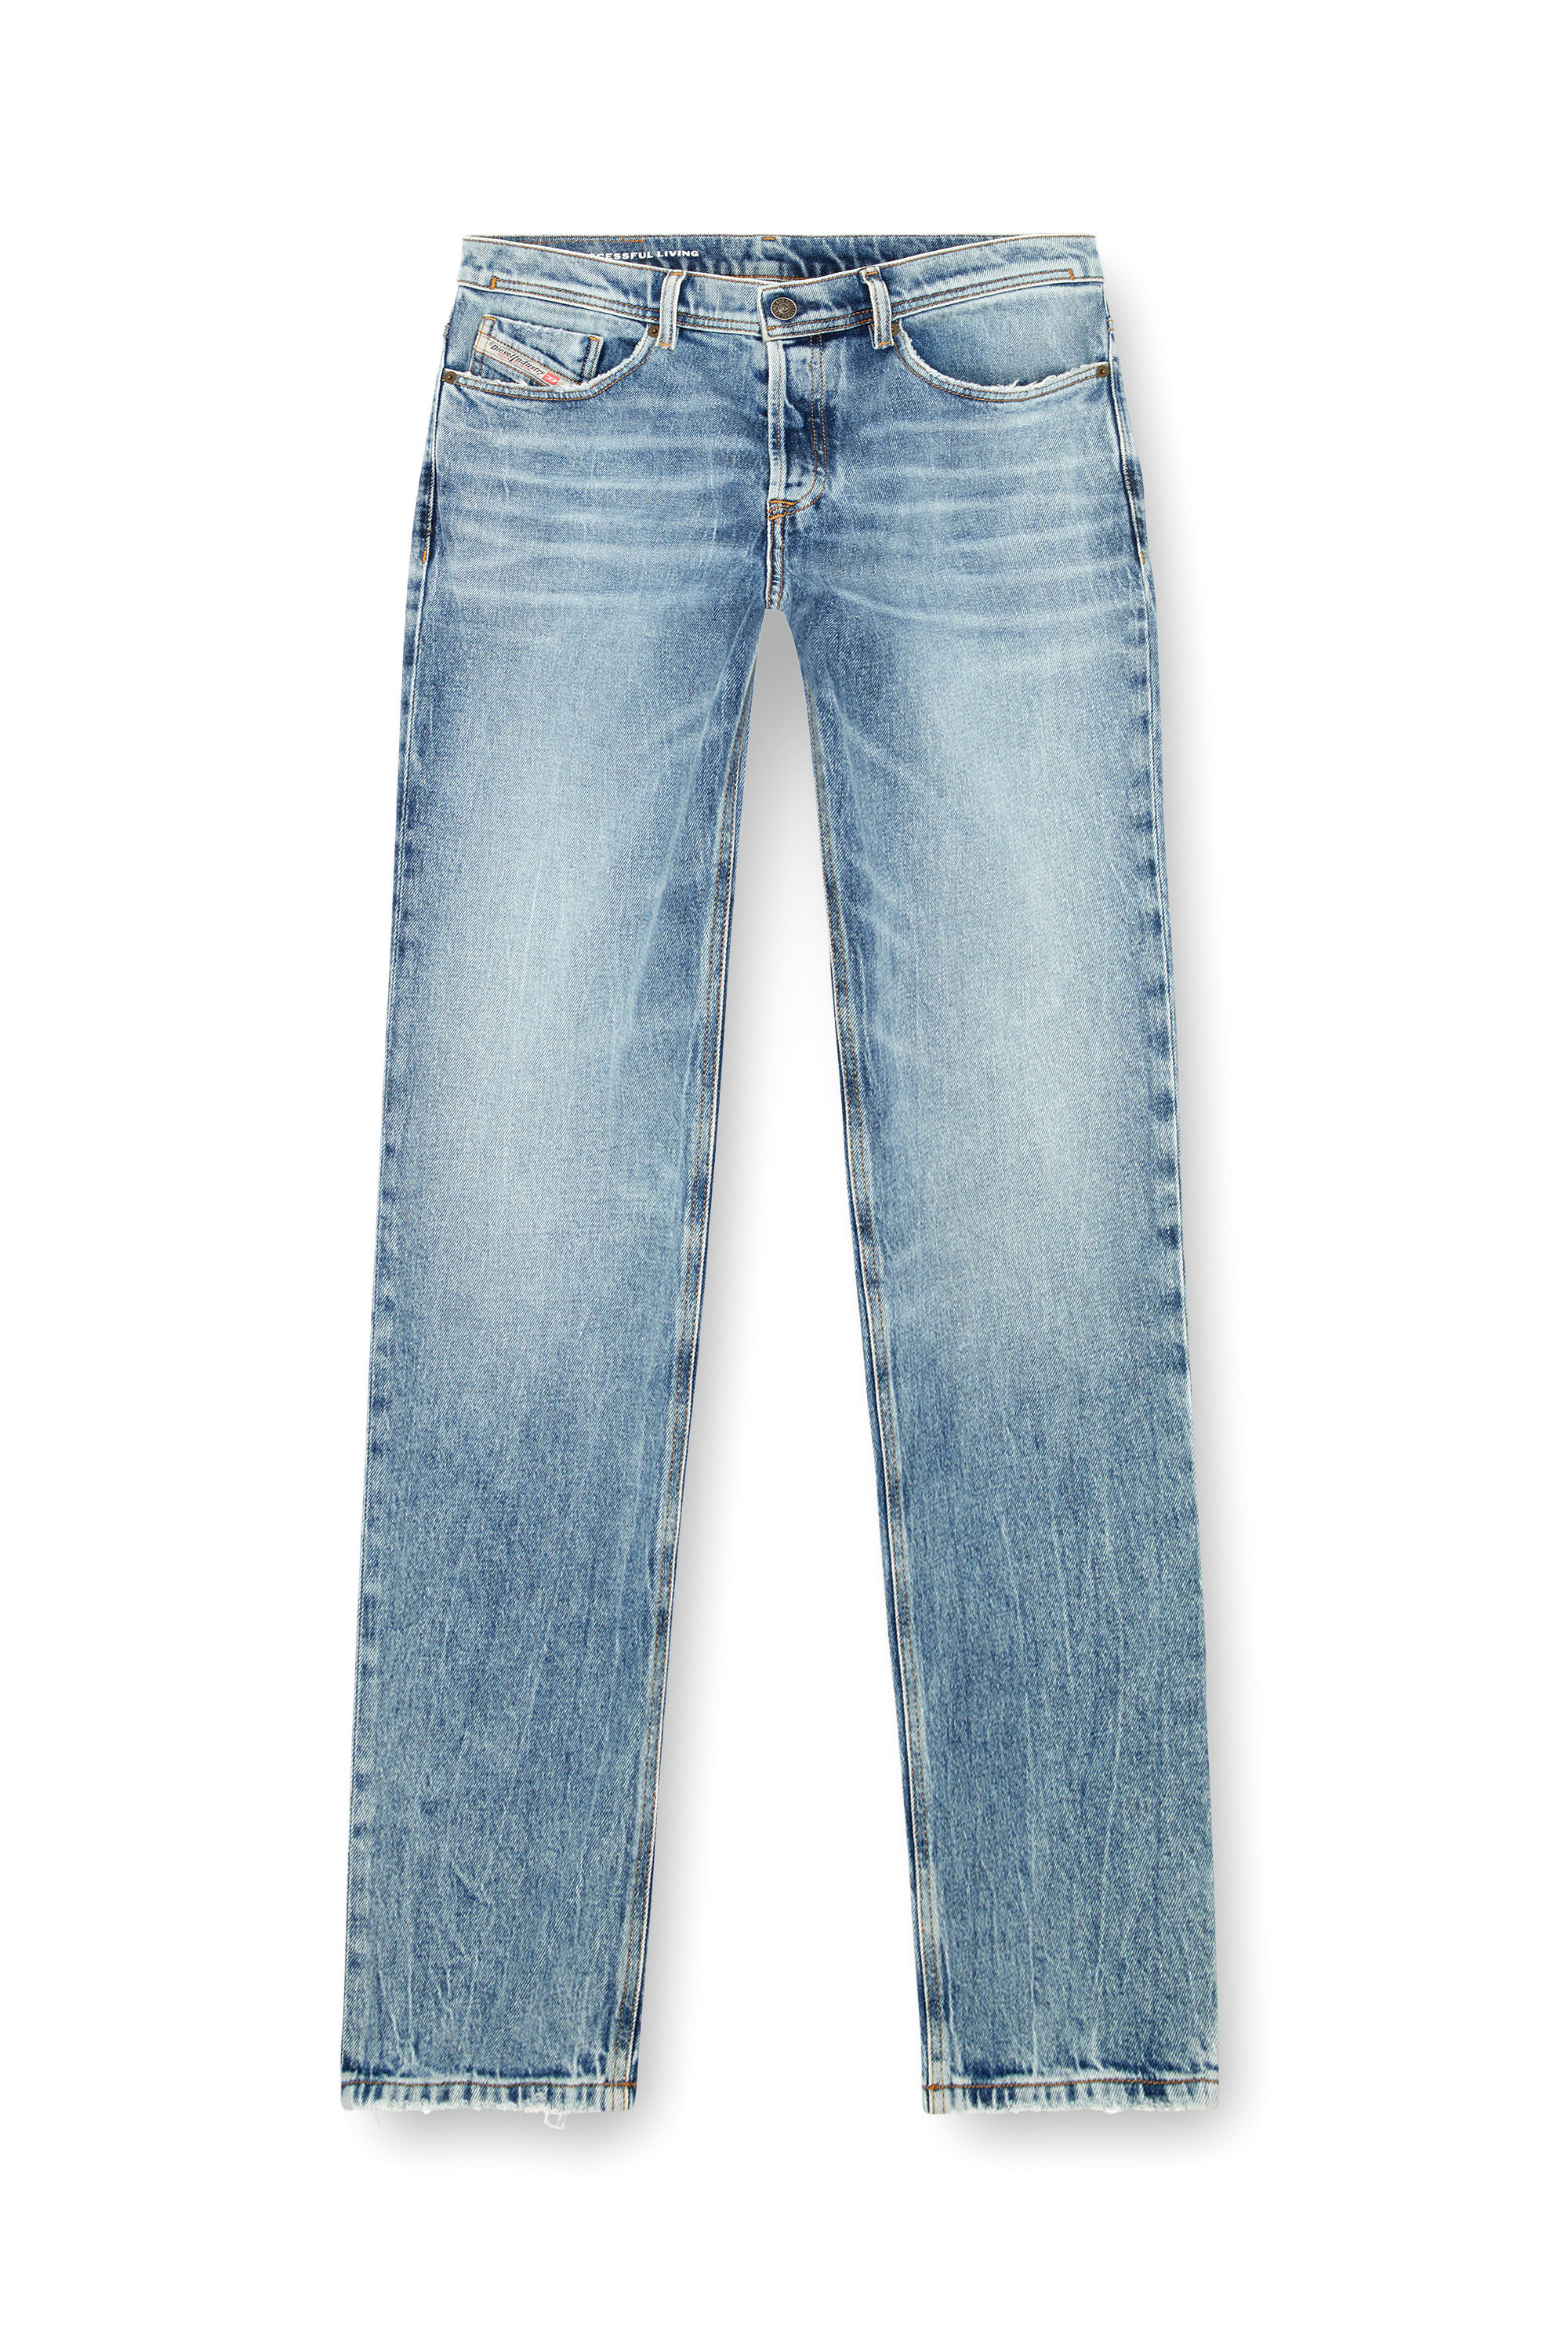 Diesel - Tapered Jeans 2023 D-Finitive 09J54, Hombre Tapered Jeans - 2023 D-Finitive in Azul marino - Image 3